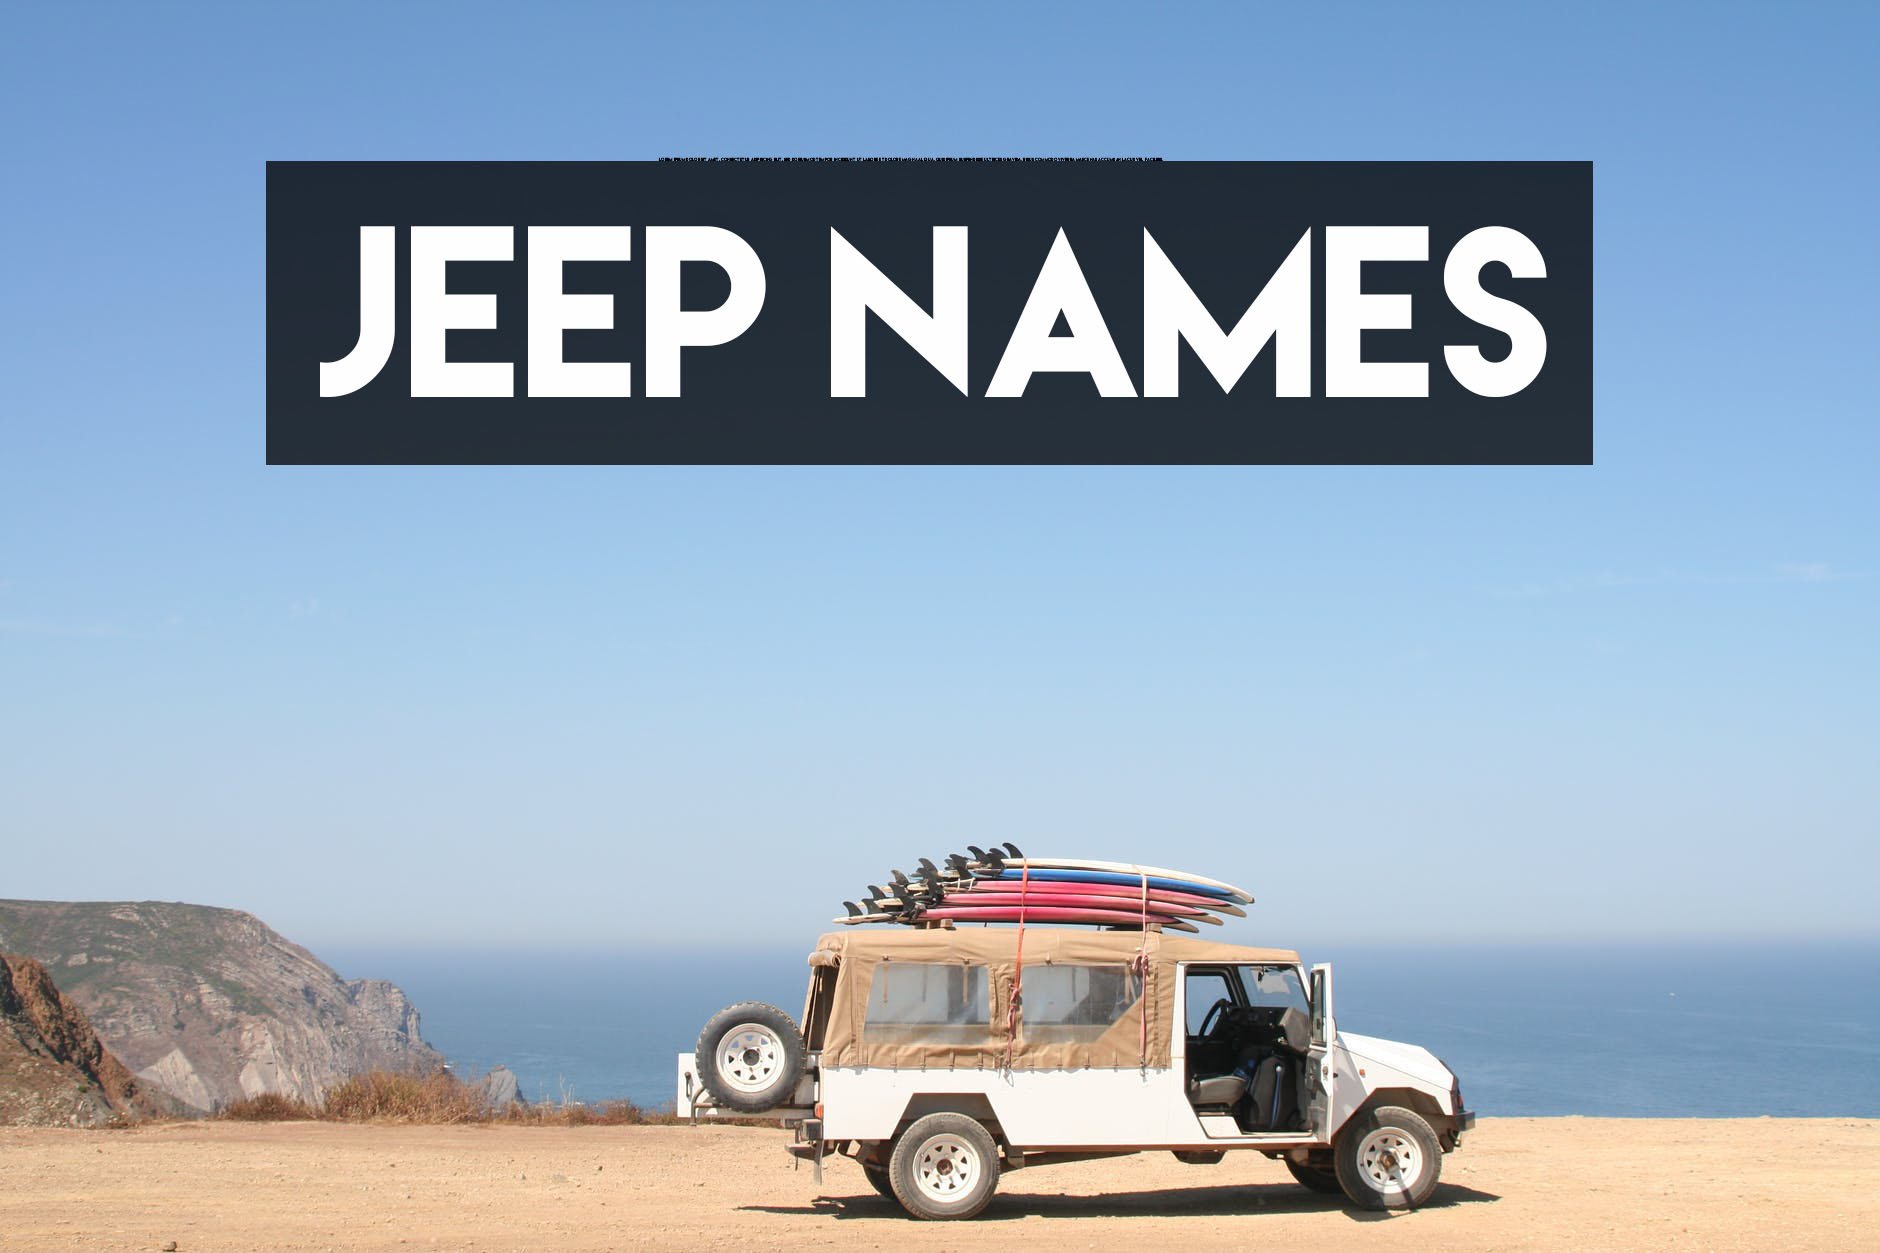 350+ Jeep Names in 2022 that Are Creative, Cool & Funny | Jeep Name Generator